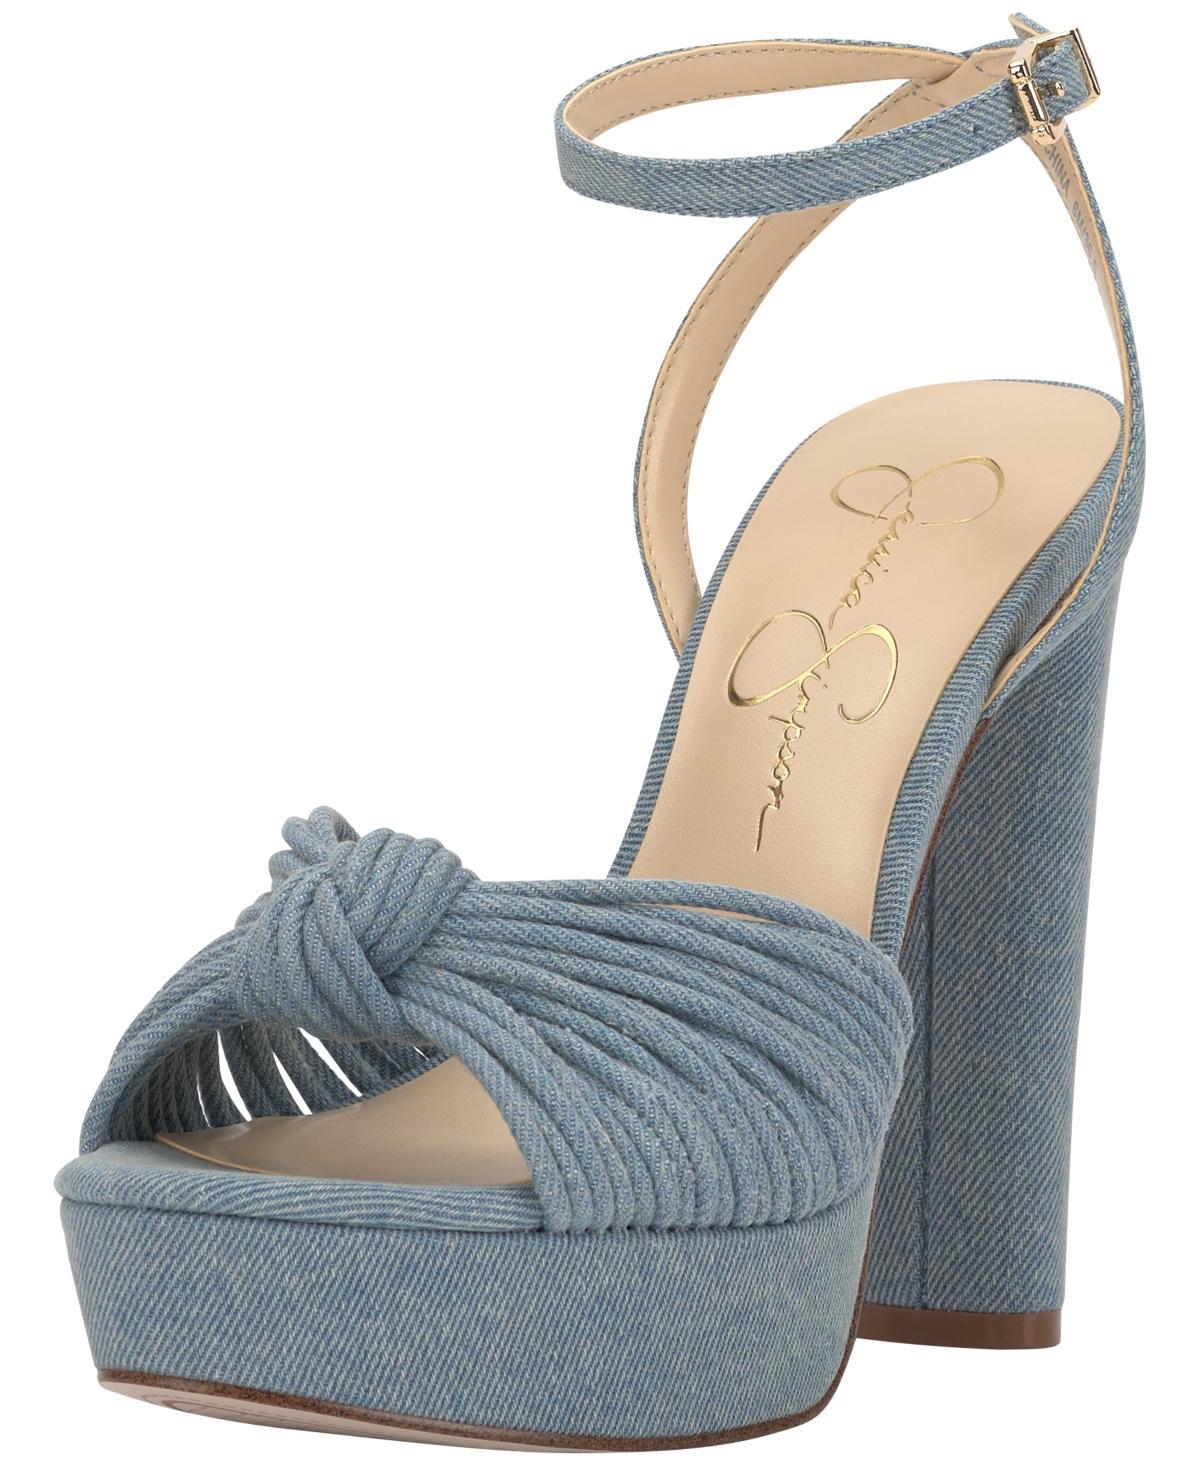 Jessica Simpson Immie Ankle Strap Embossed Platform Dress Sandals Product Image